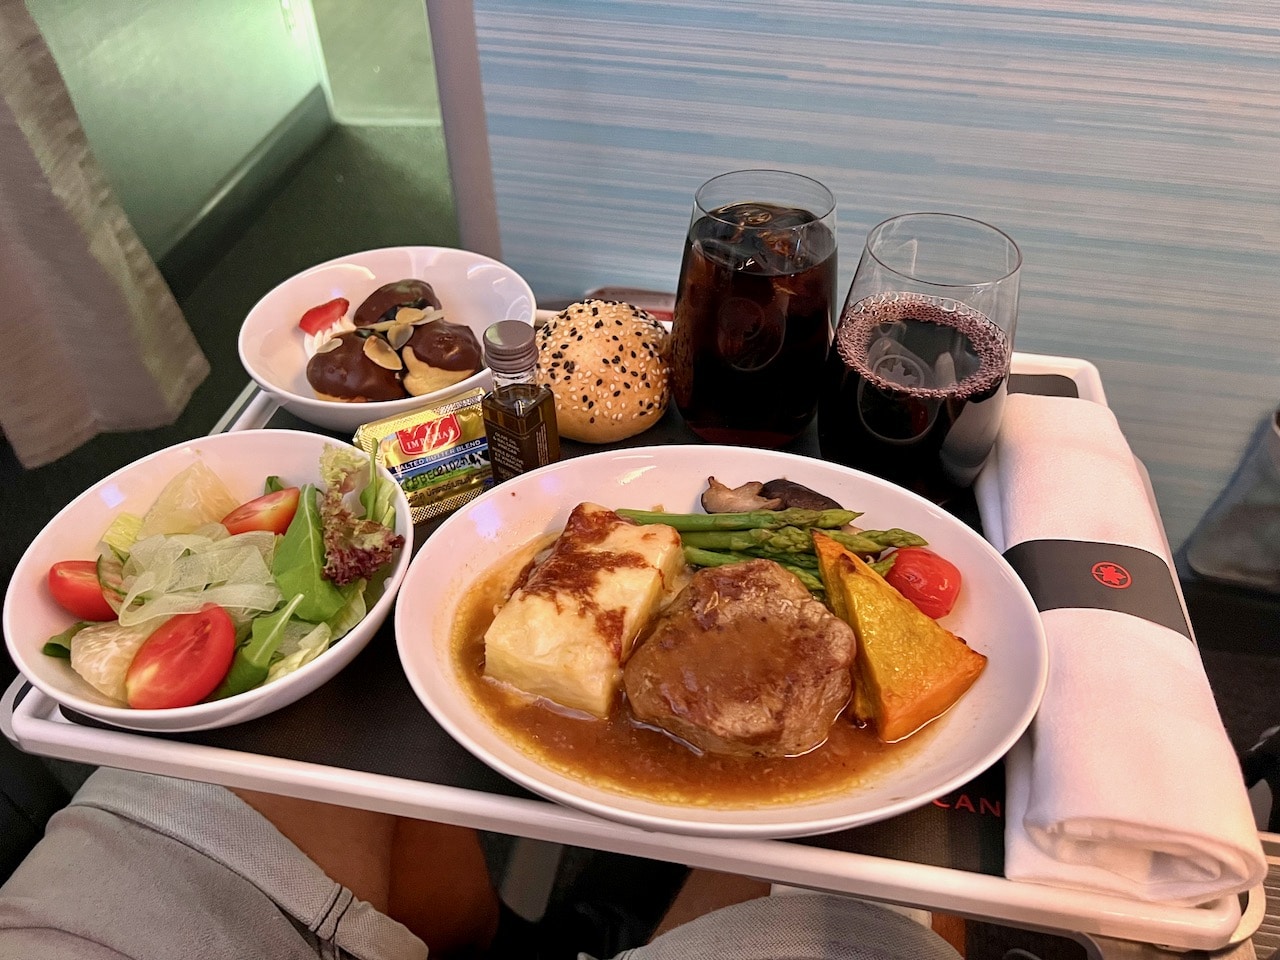 Air Canada Premium Economy Class meal service flying Bangkok to Vancouver